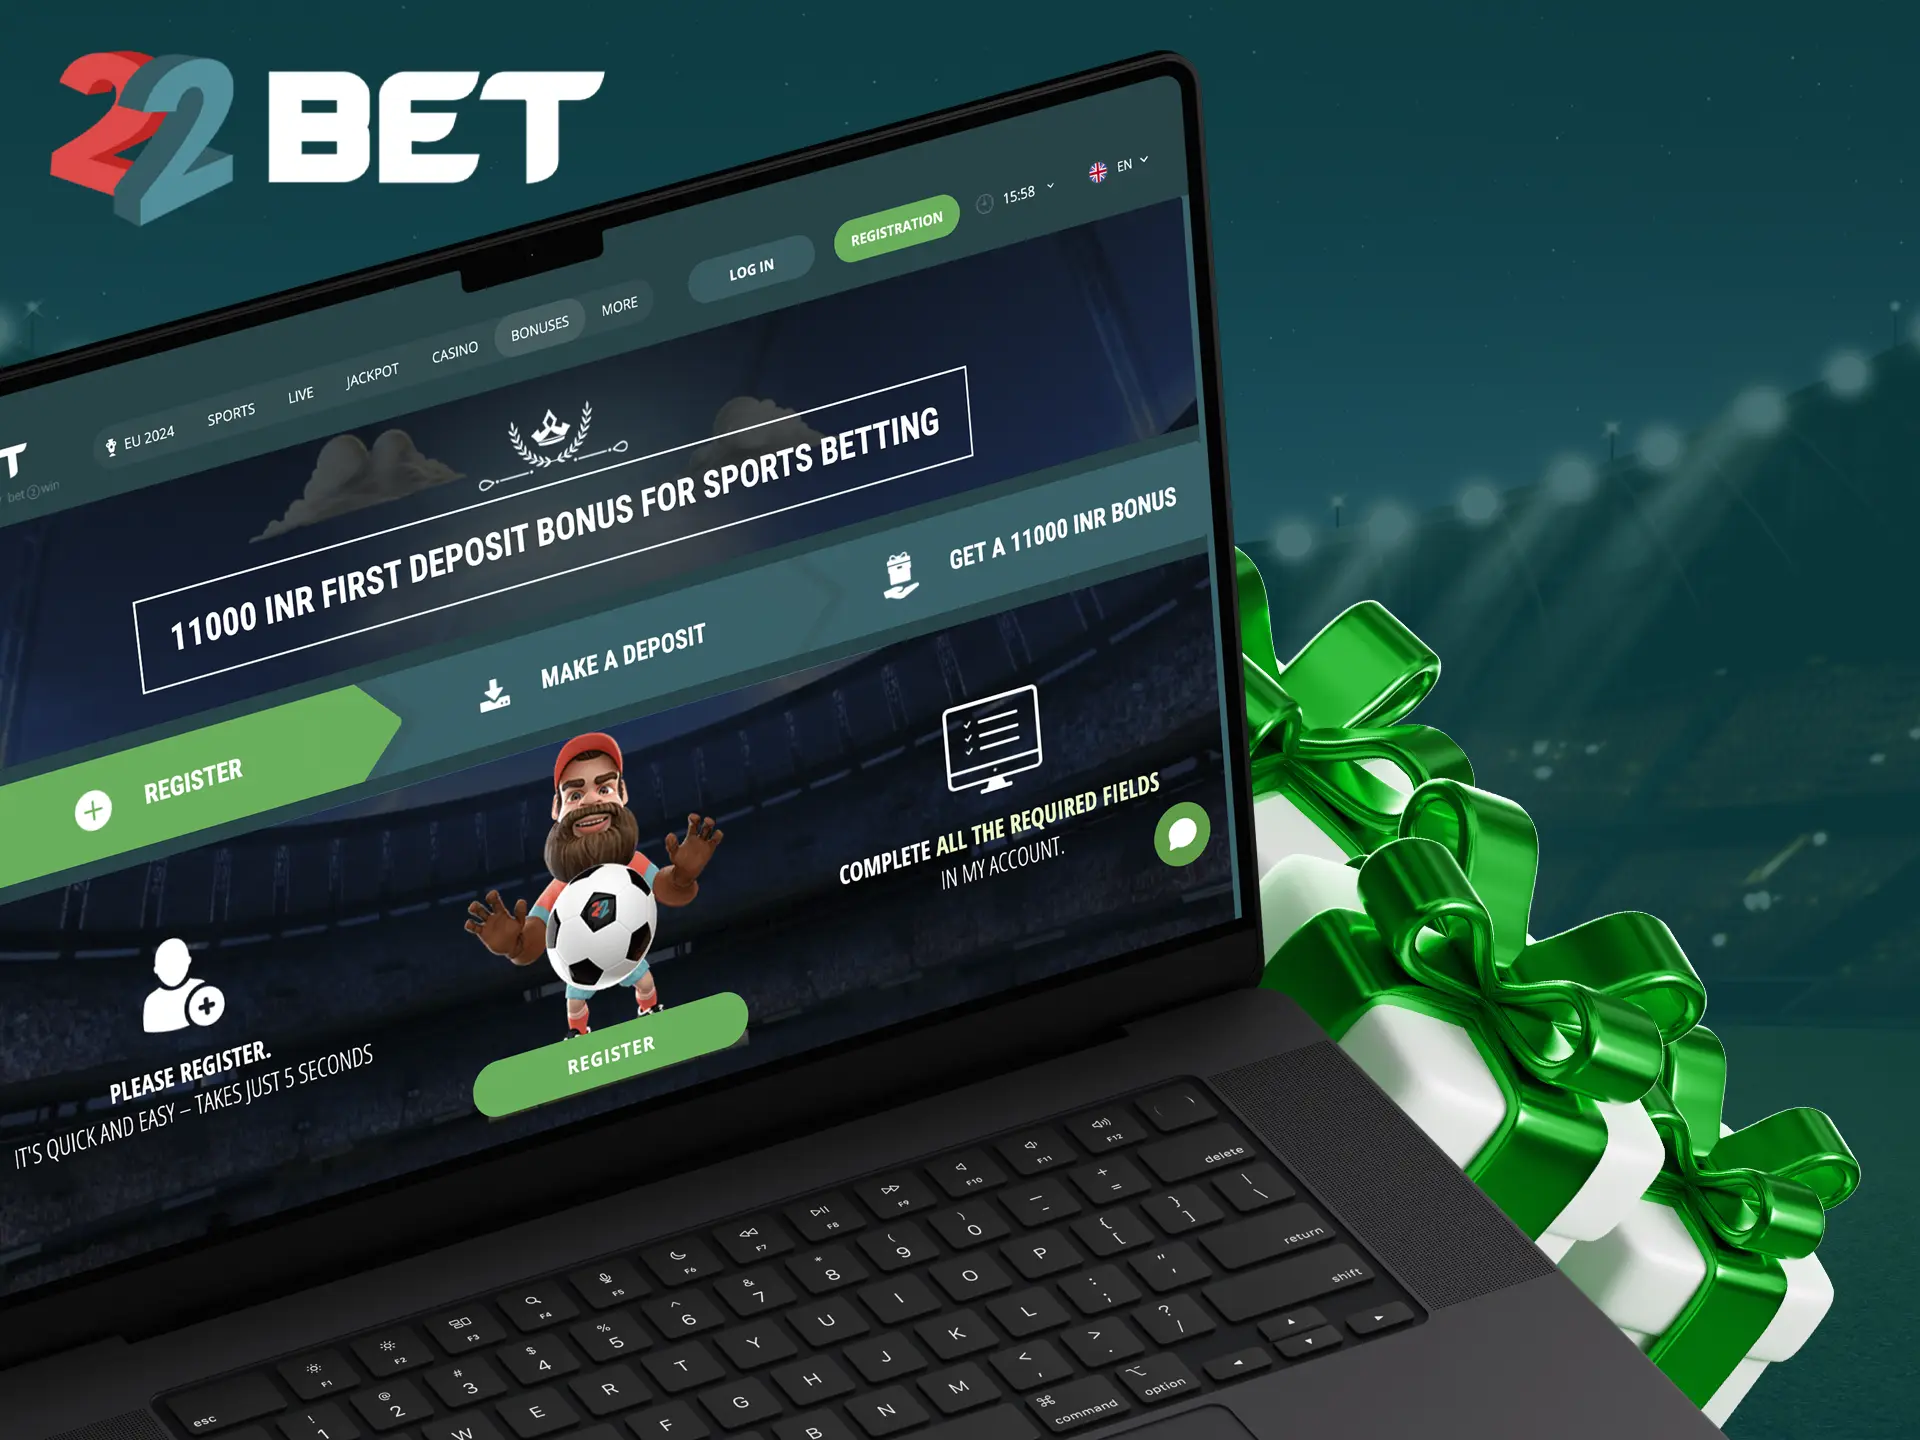 Take advantage of 22Bet's sports bonus programme to make your bets even bigger and more frequent.